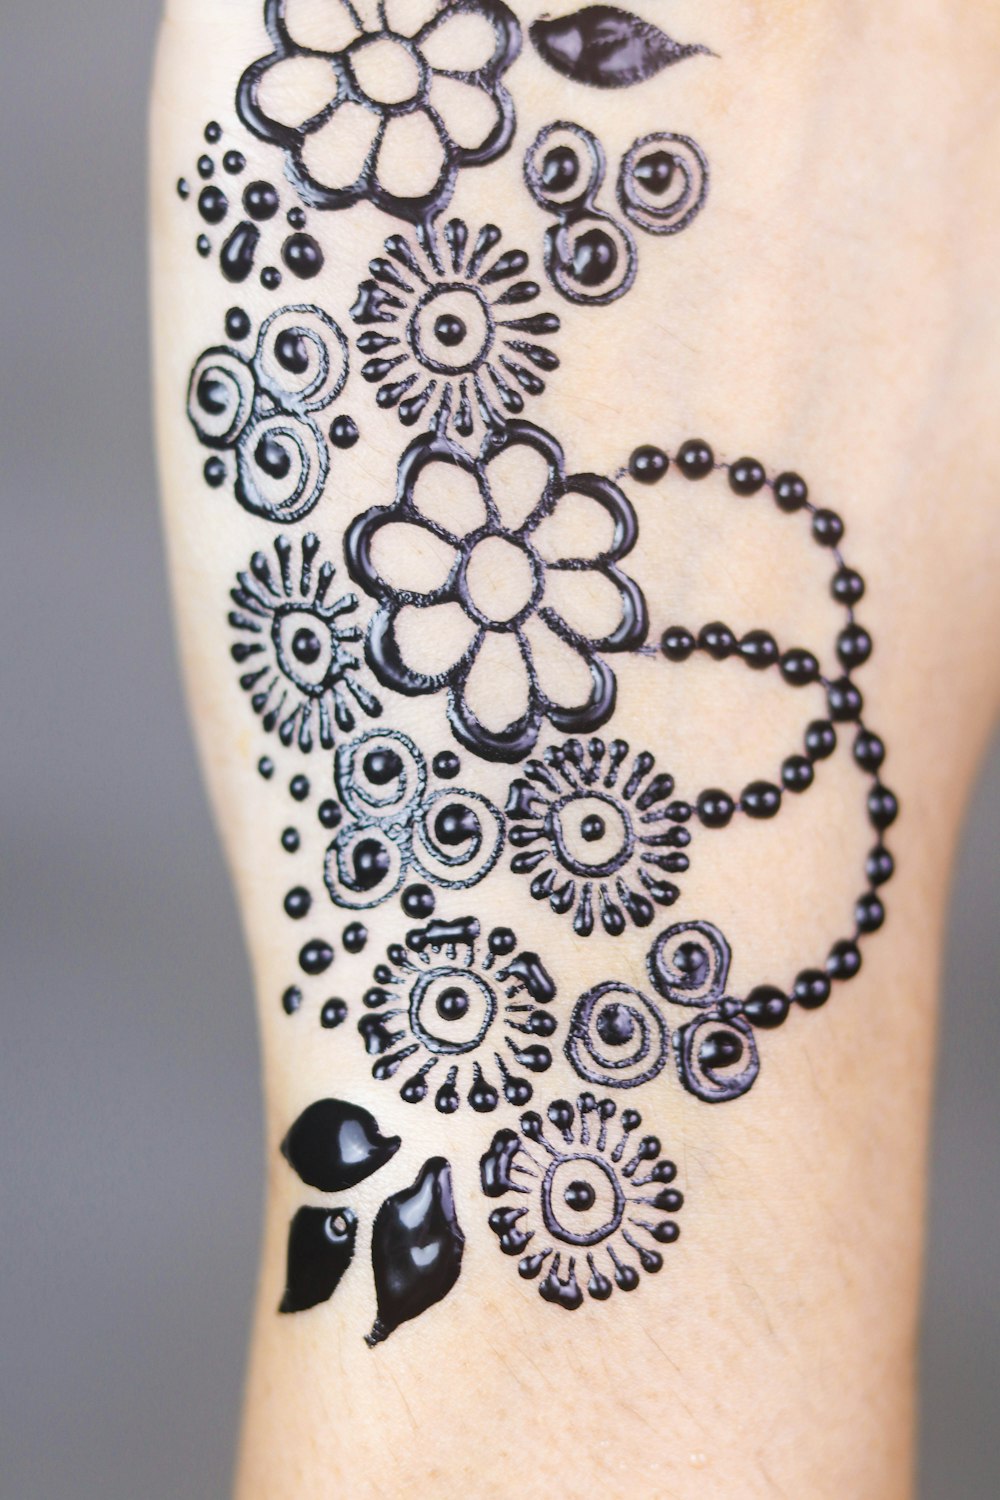 person's petaled flower tattoo